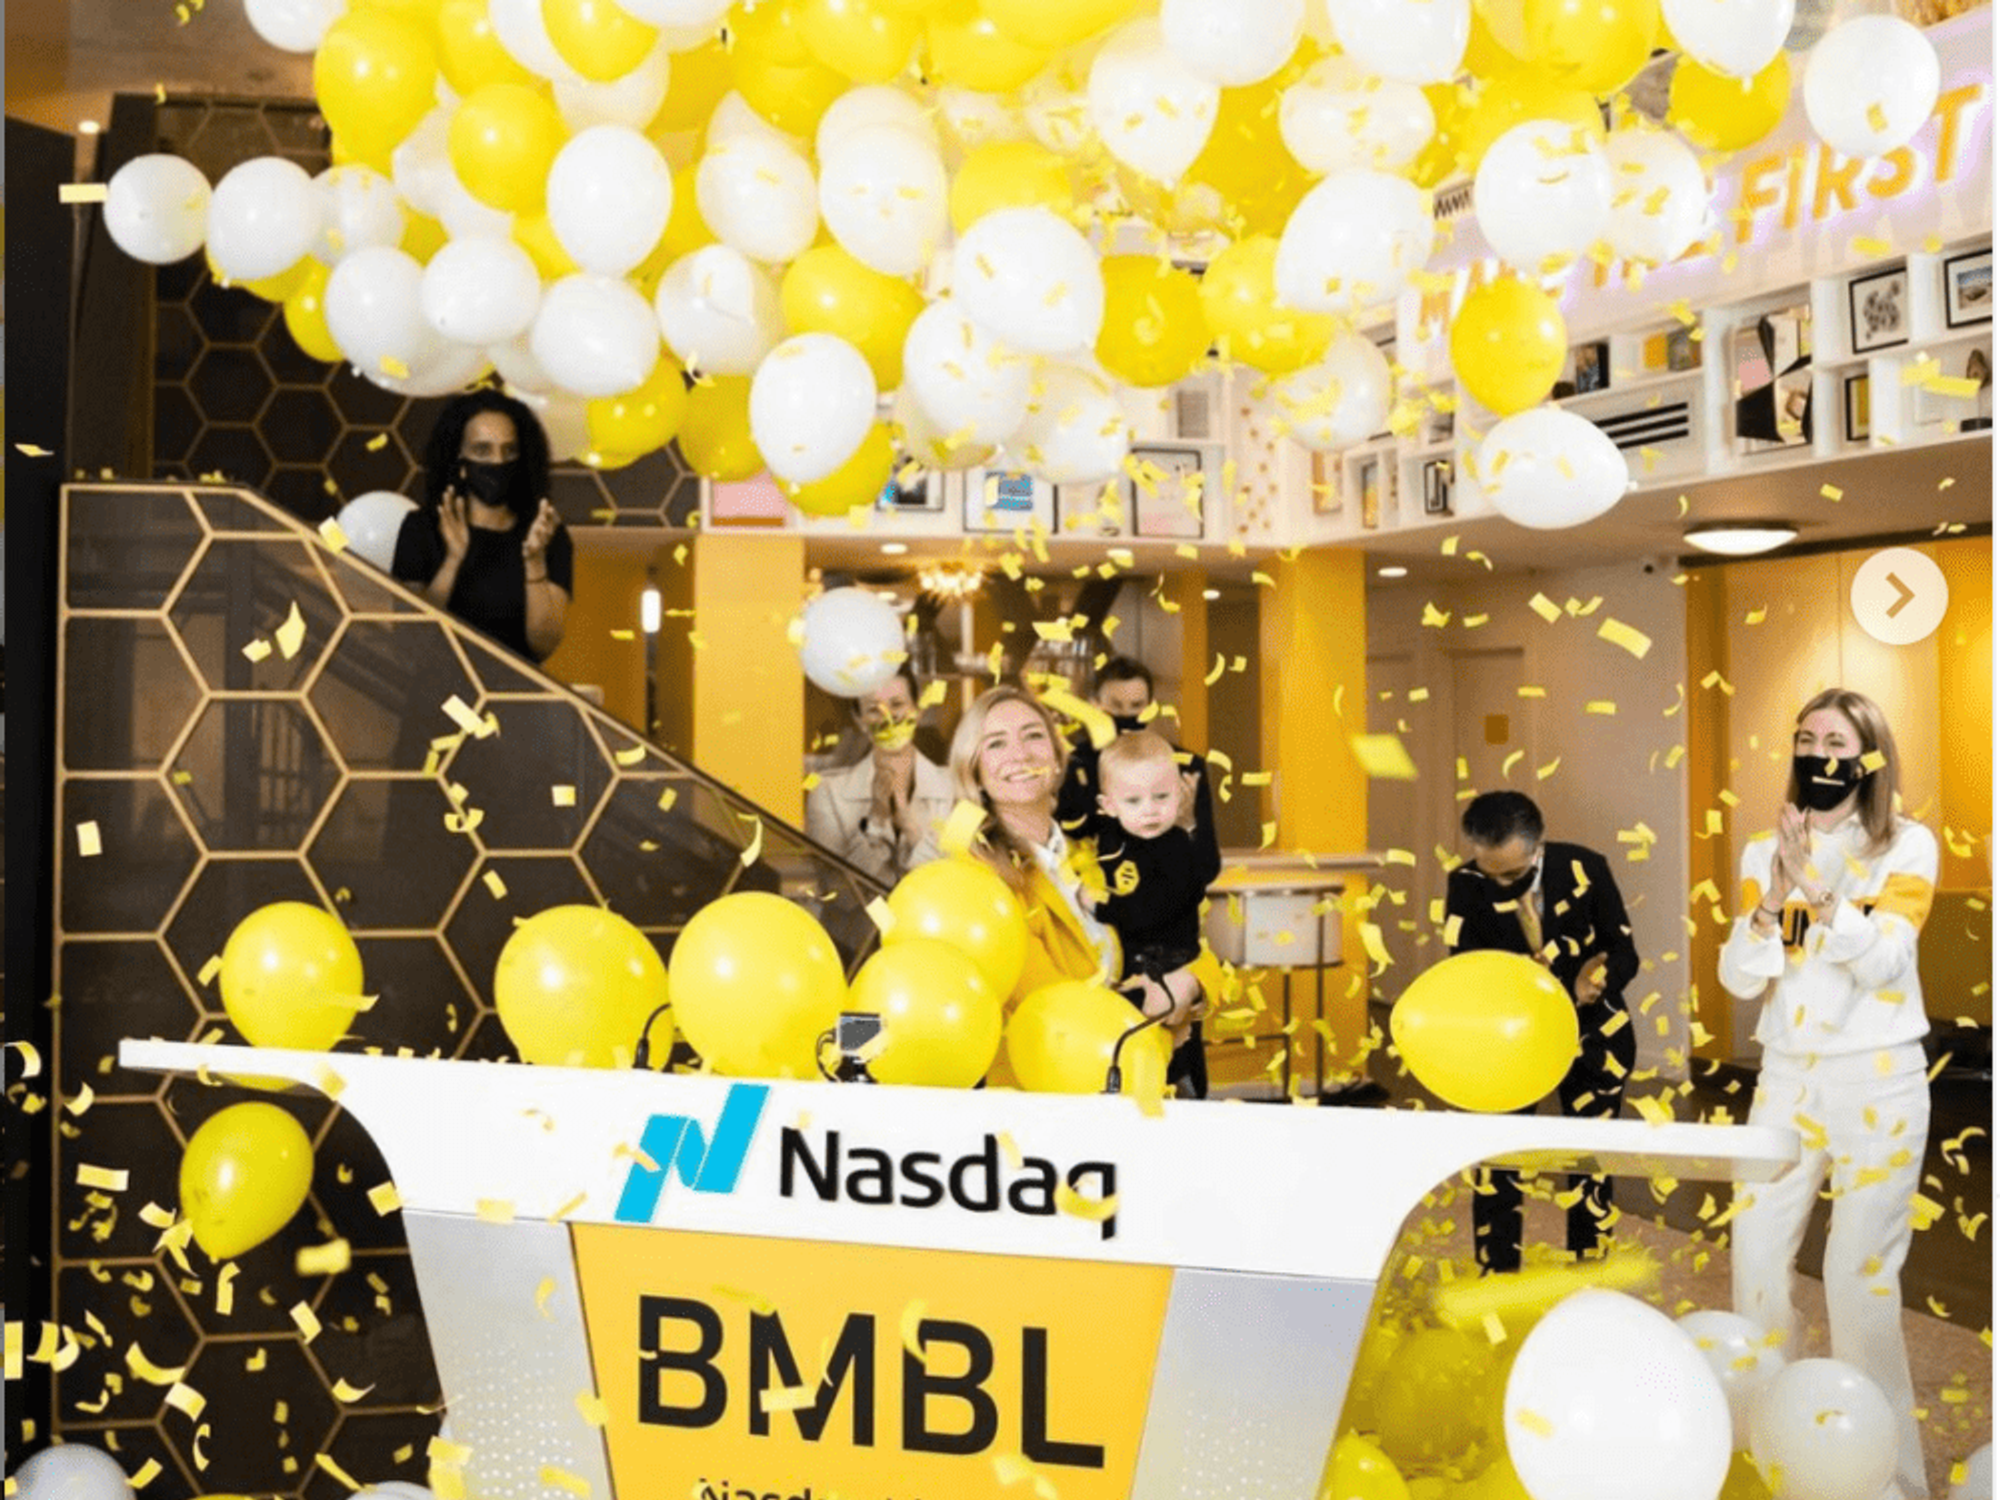 Bumble Whitney Wolfe Herd IPO day